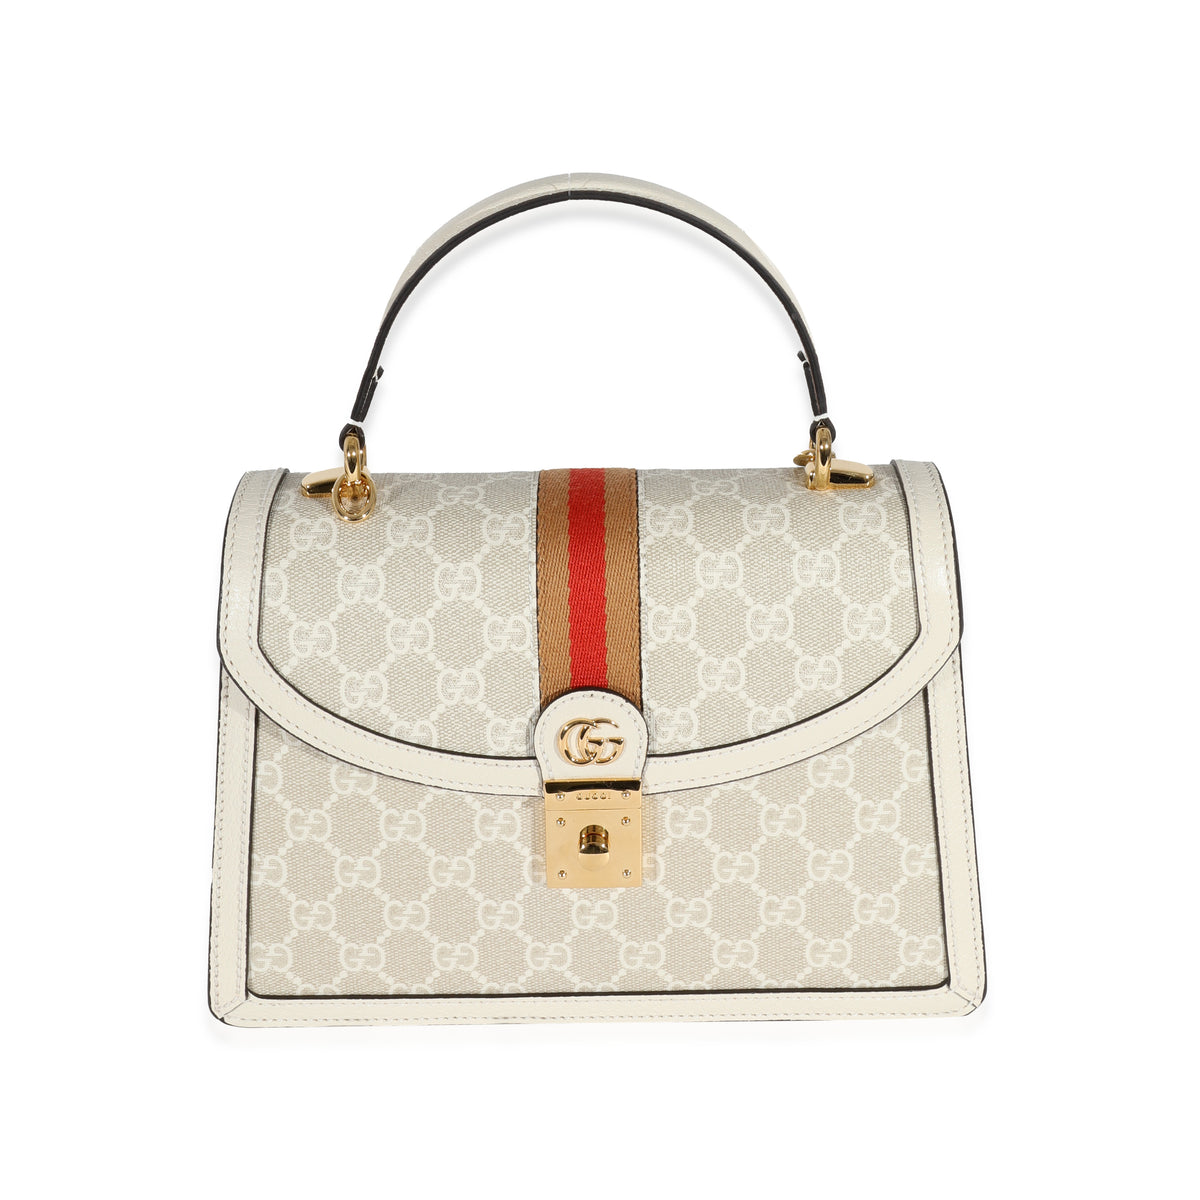 Gucci Limited Edition Cream Ophidia GG Small Top Handle